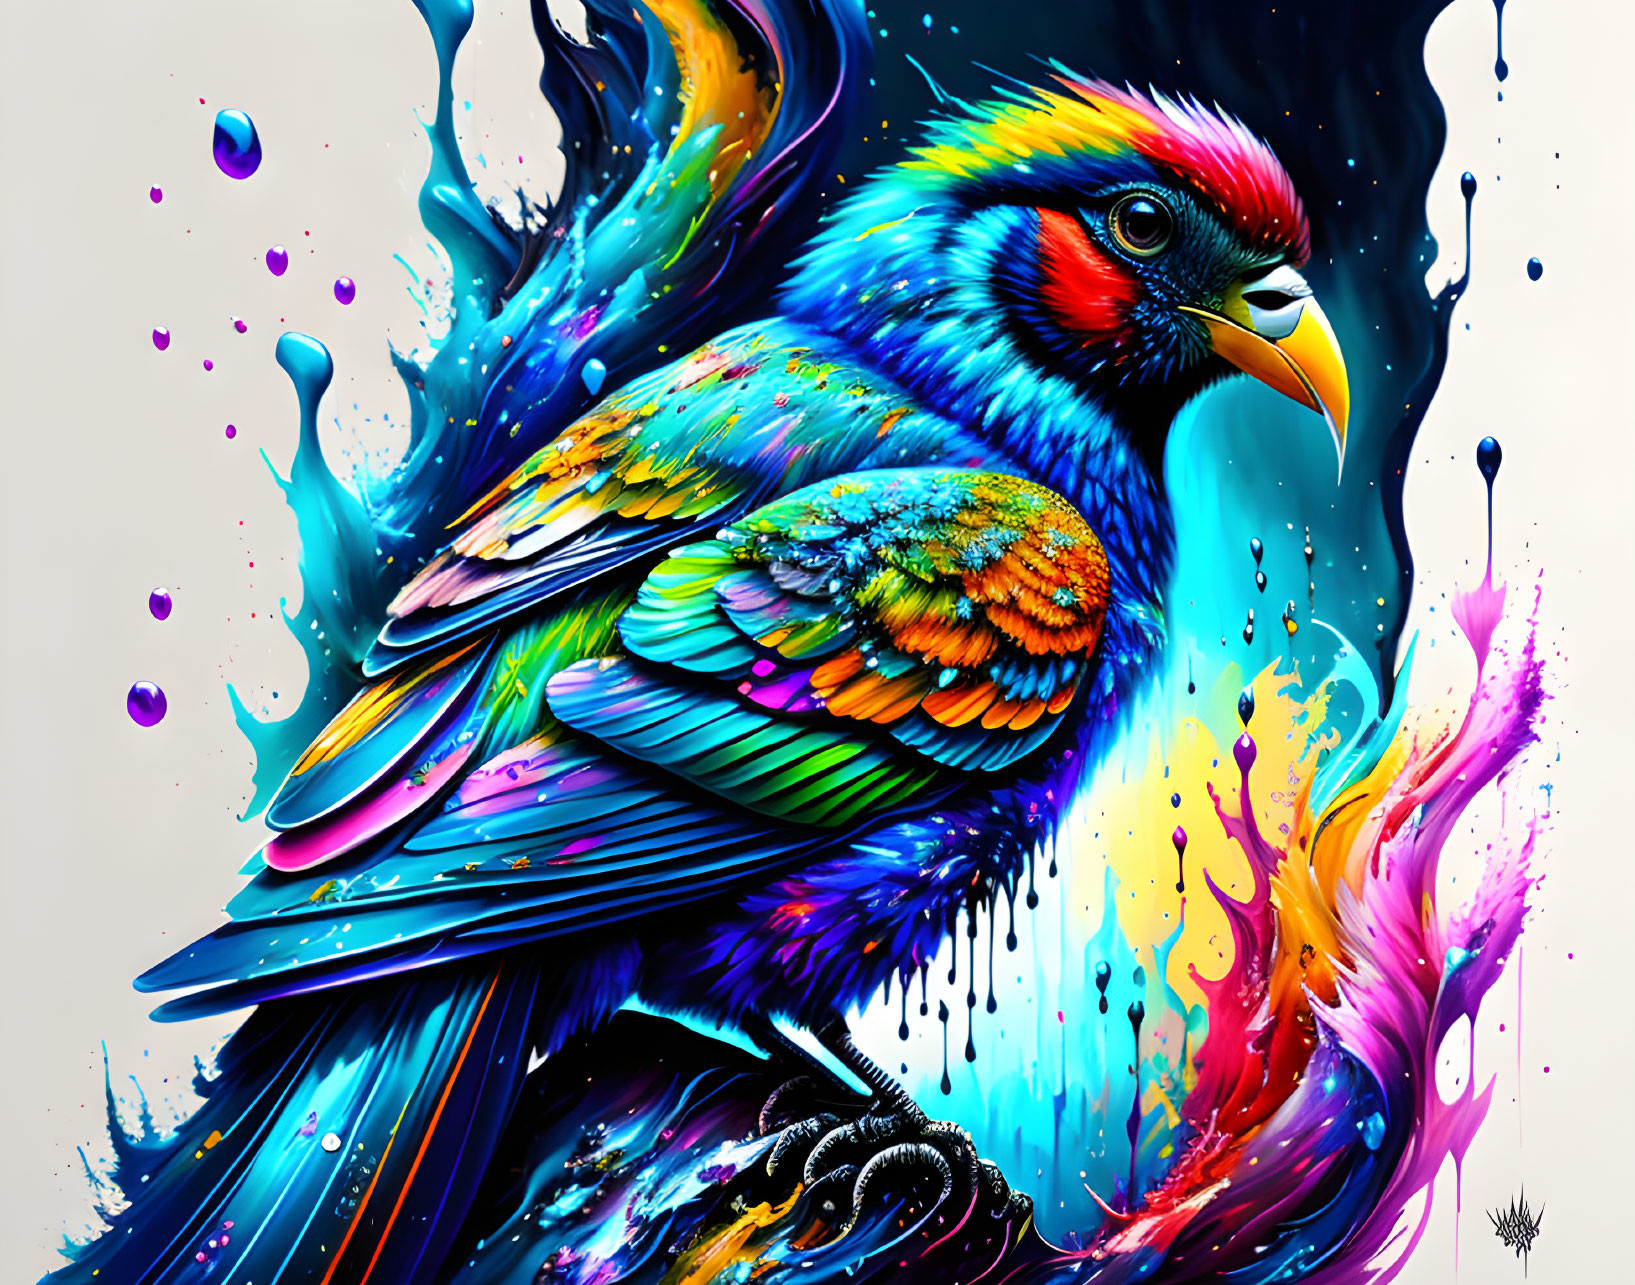 Colorful Bird Artwork with Vibrant Blue, Orange, and Pink Hues